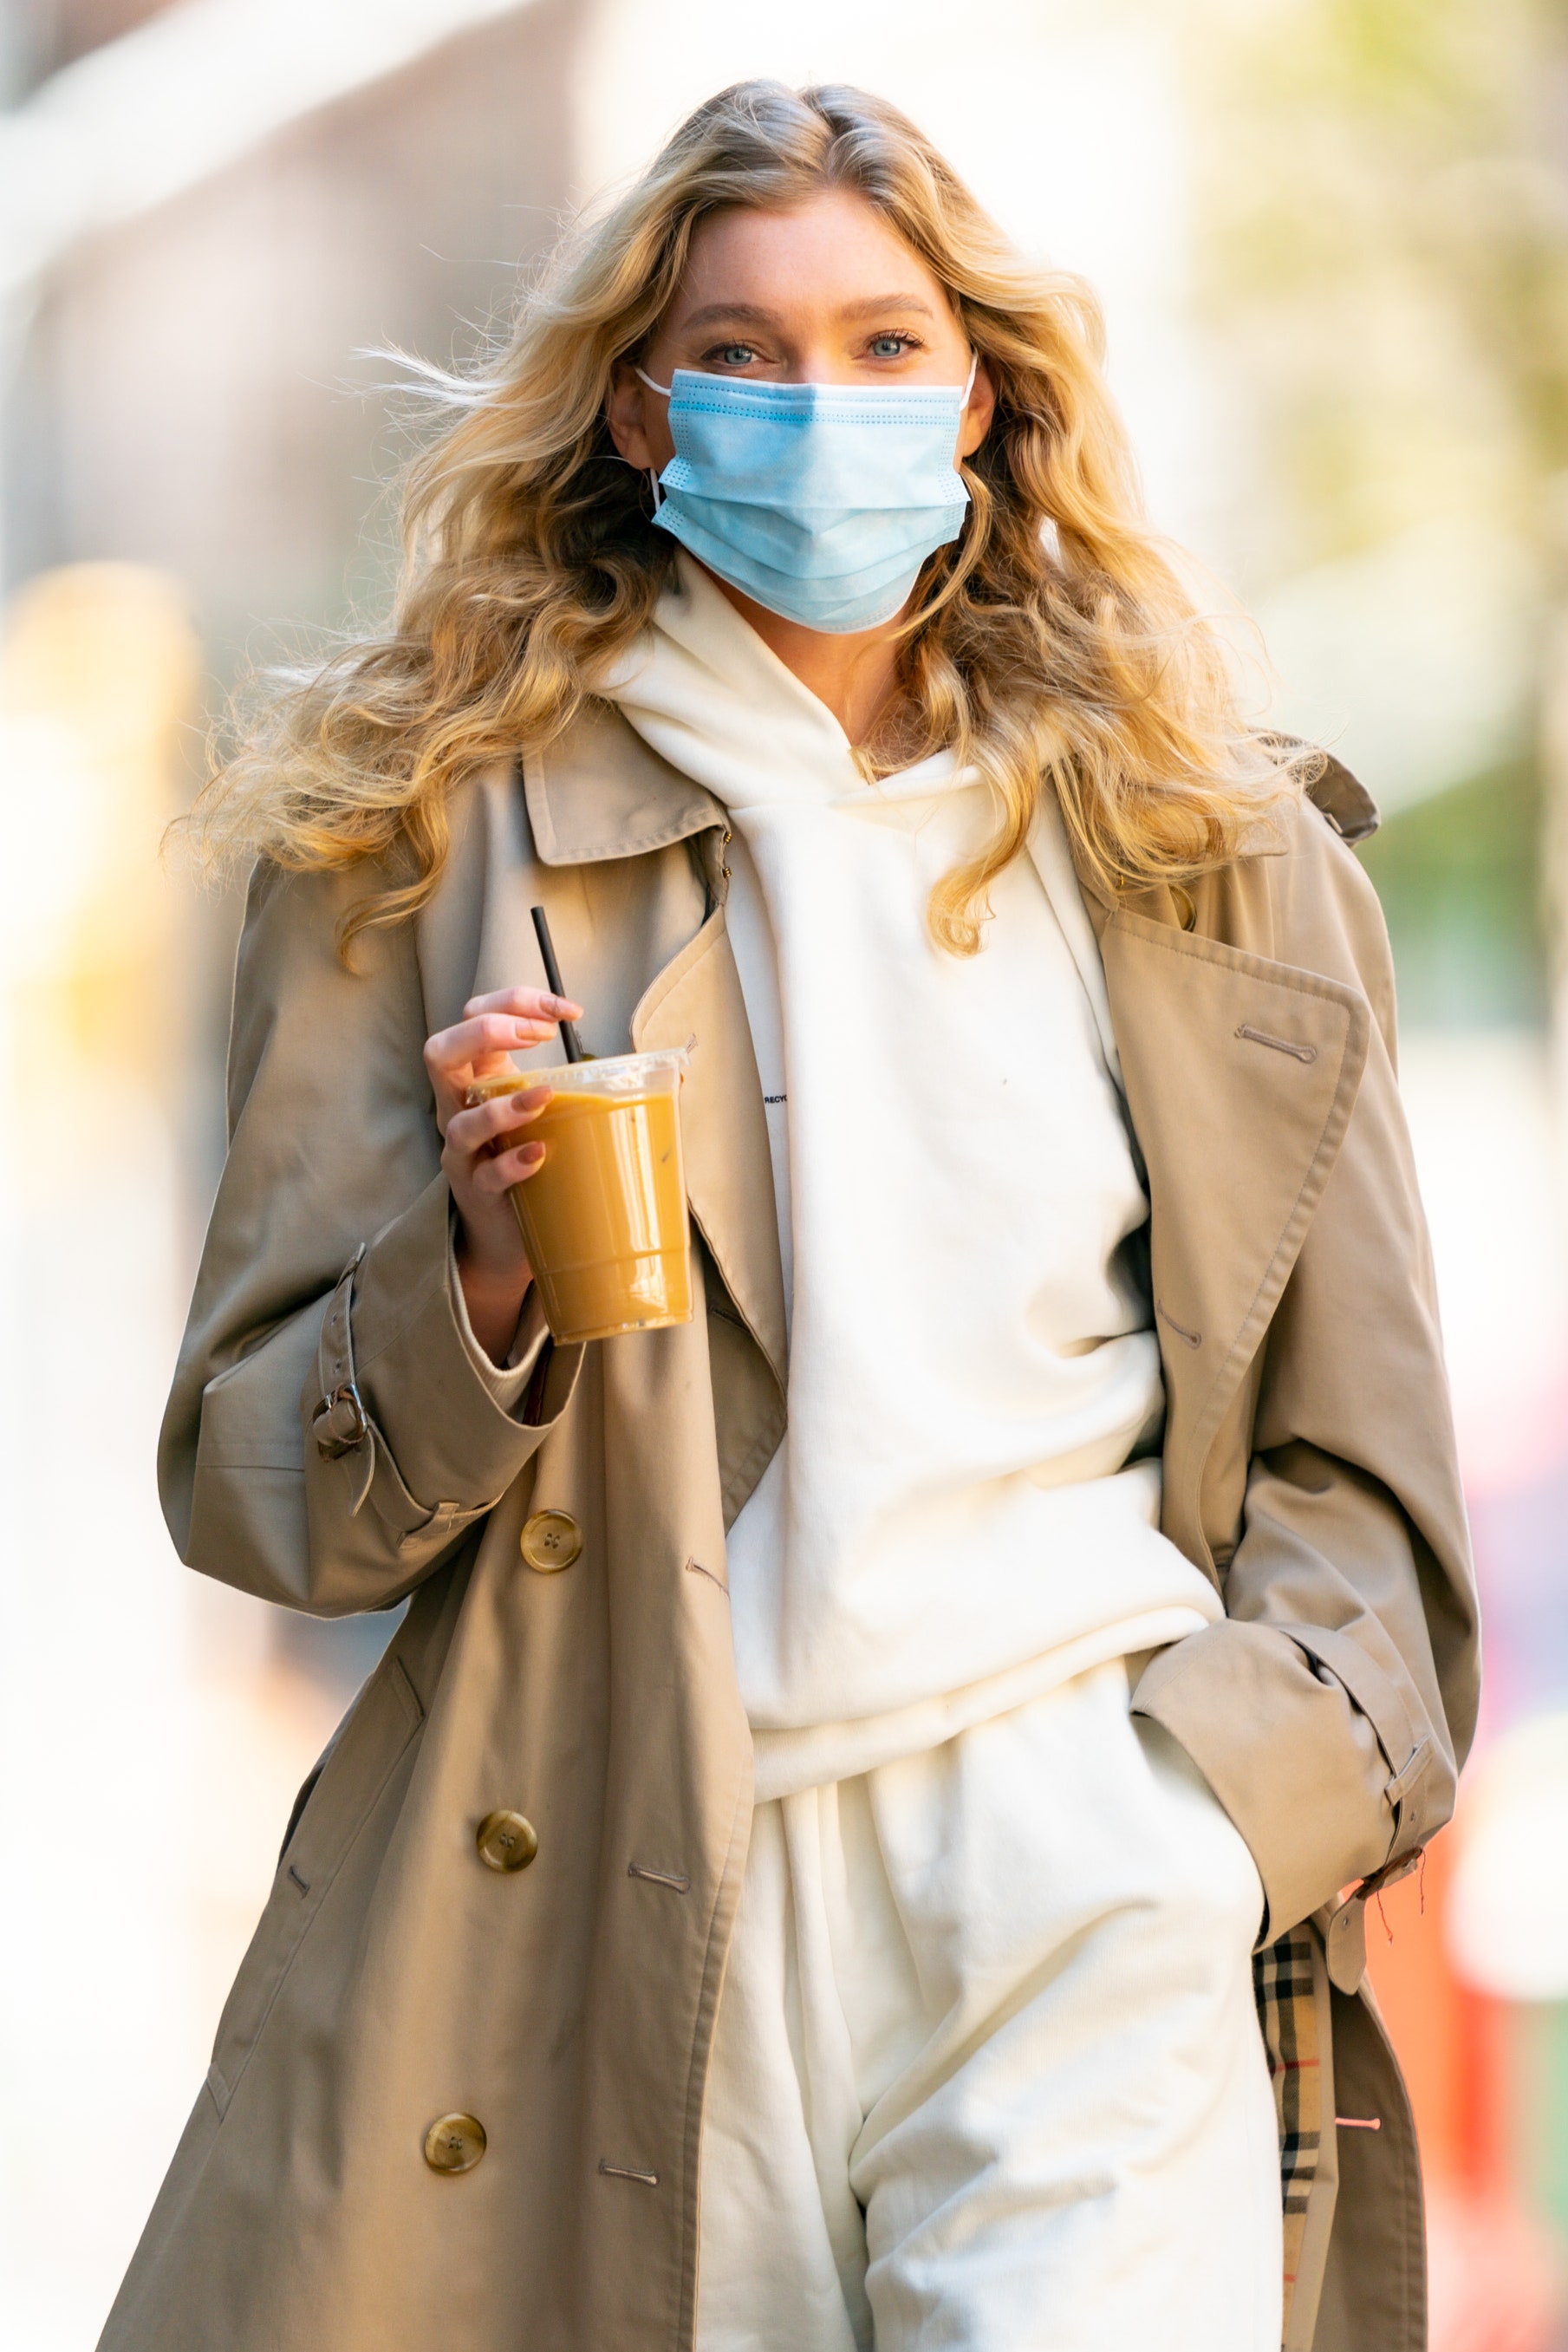 NEW YORK NEW YORK  APRIL 22 Elsa Hosk is seen wearing a protective face mask during the COVID19 pandemic in SoHo on...